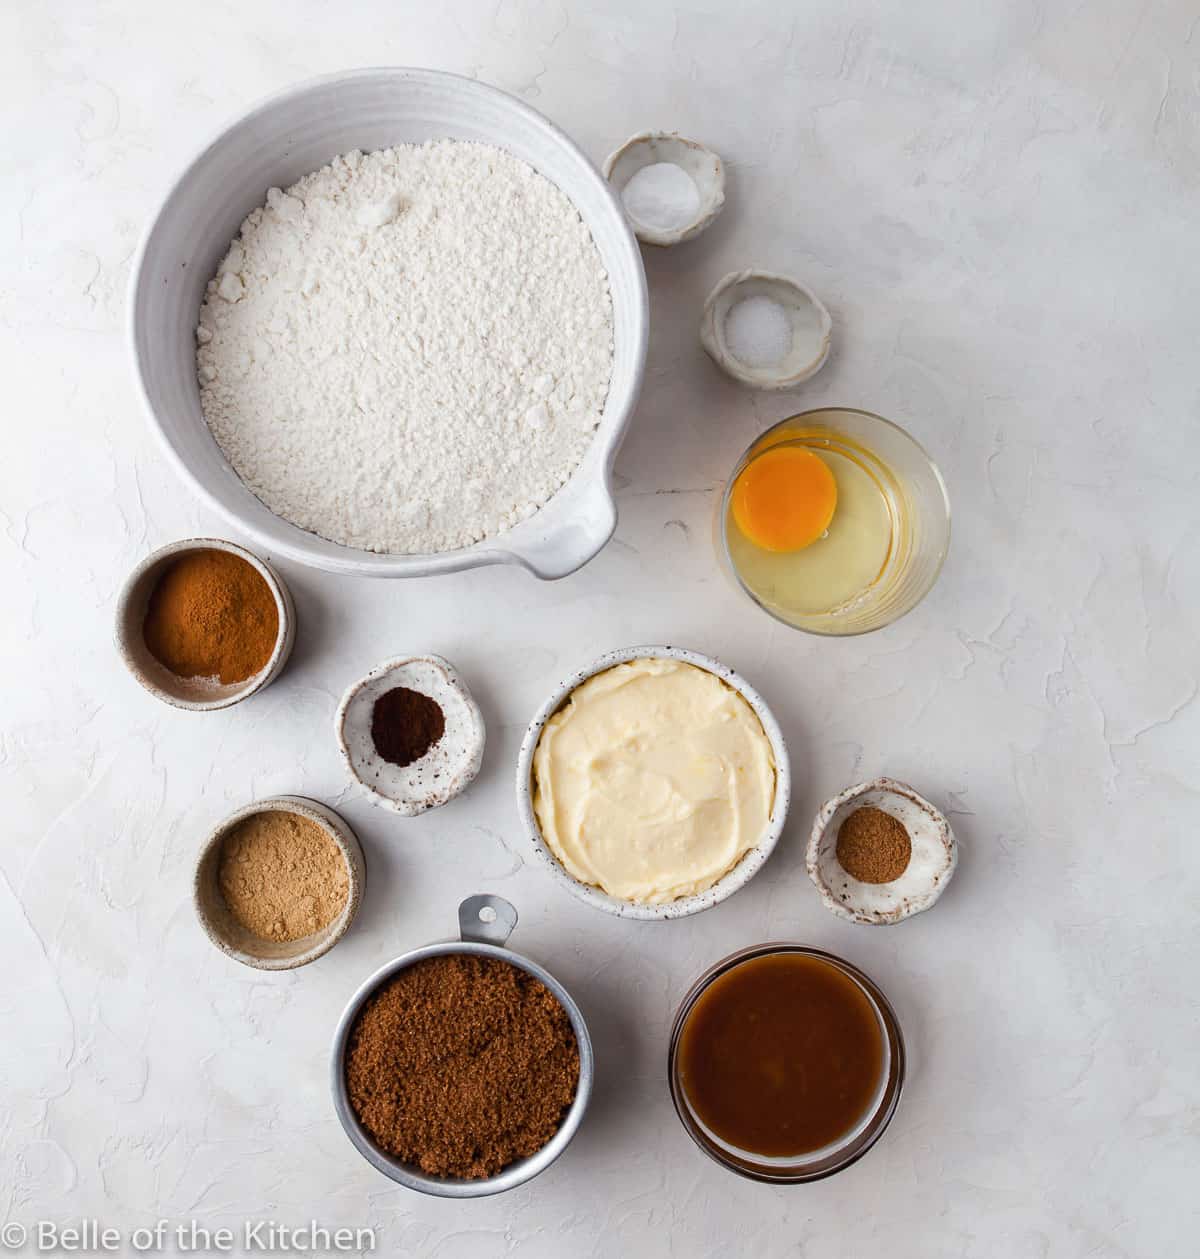 ingredients laid out to make cookies